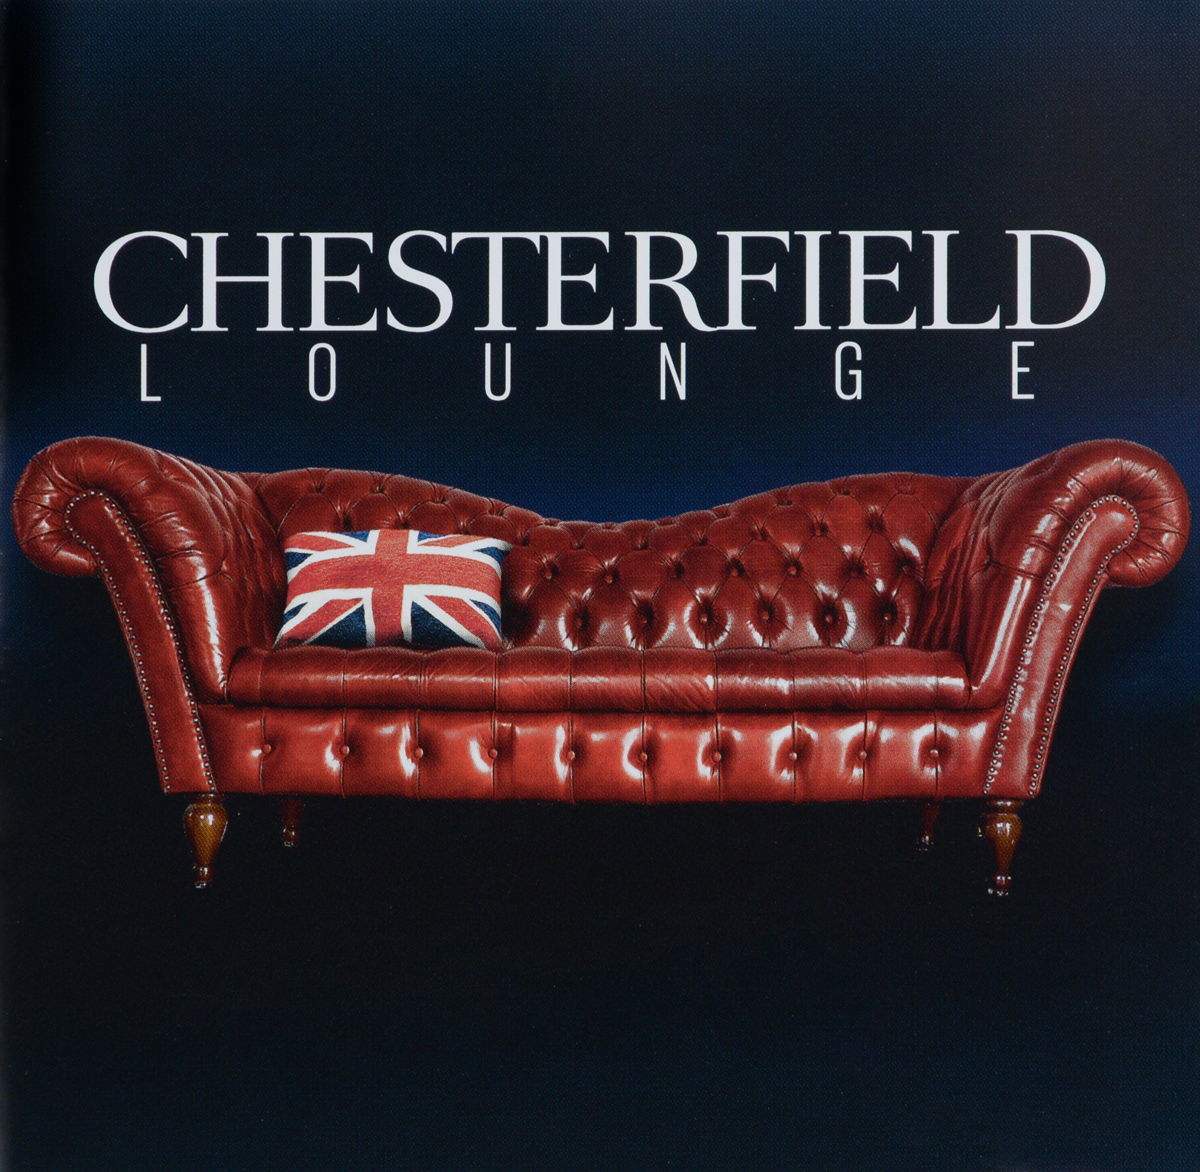 Chesterfield Lounge (2 CD)